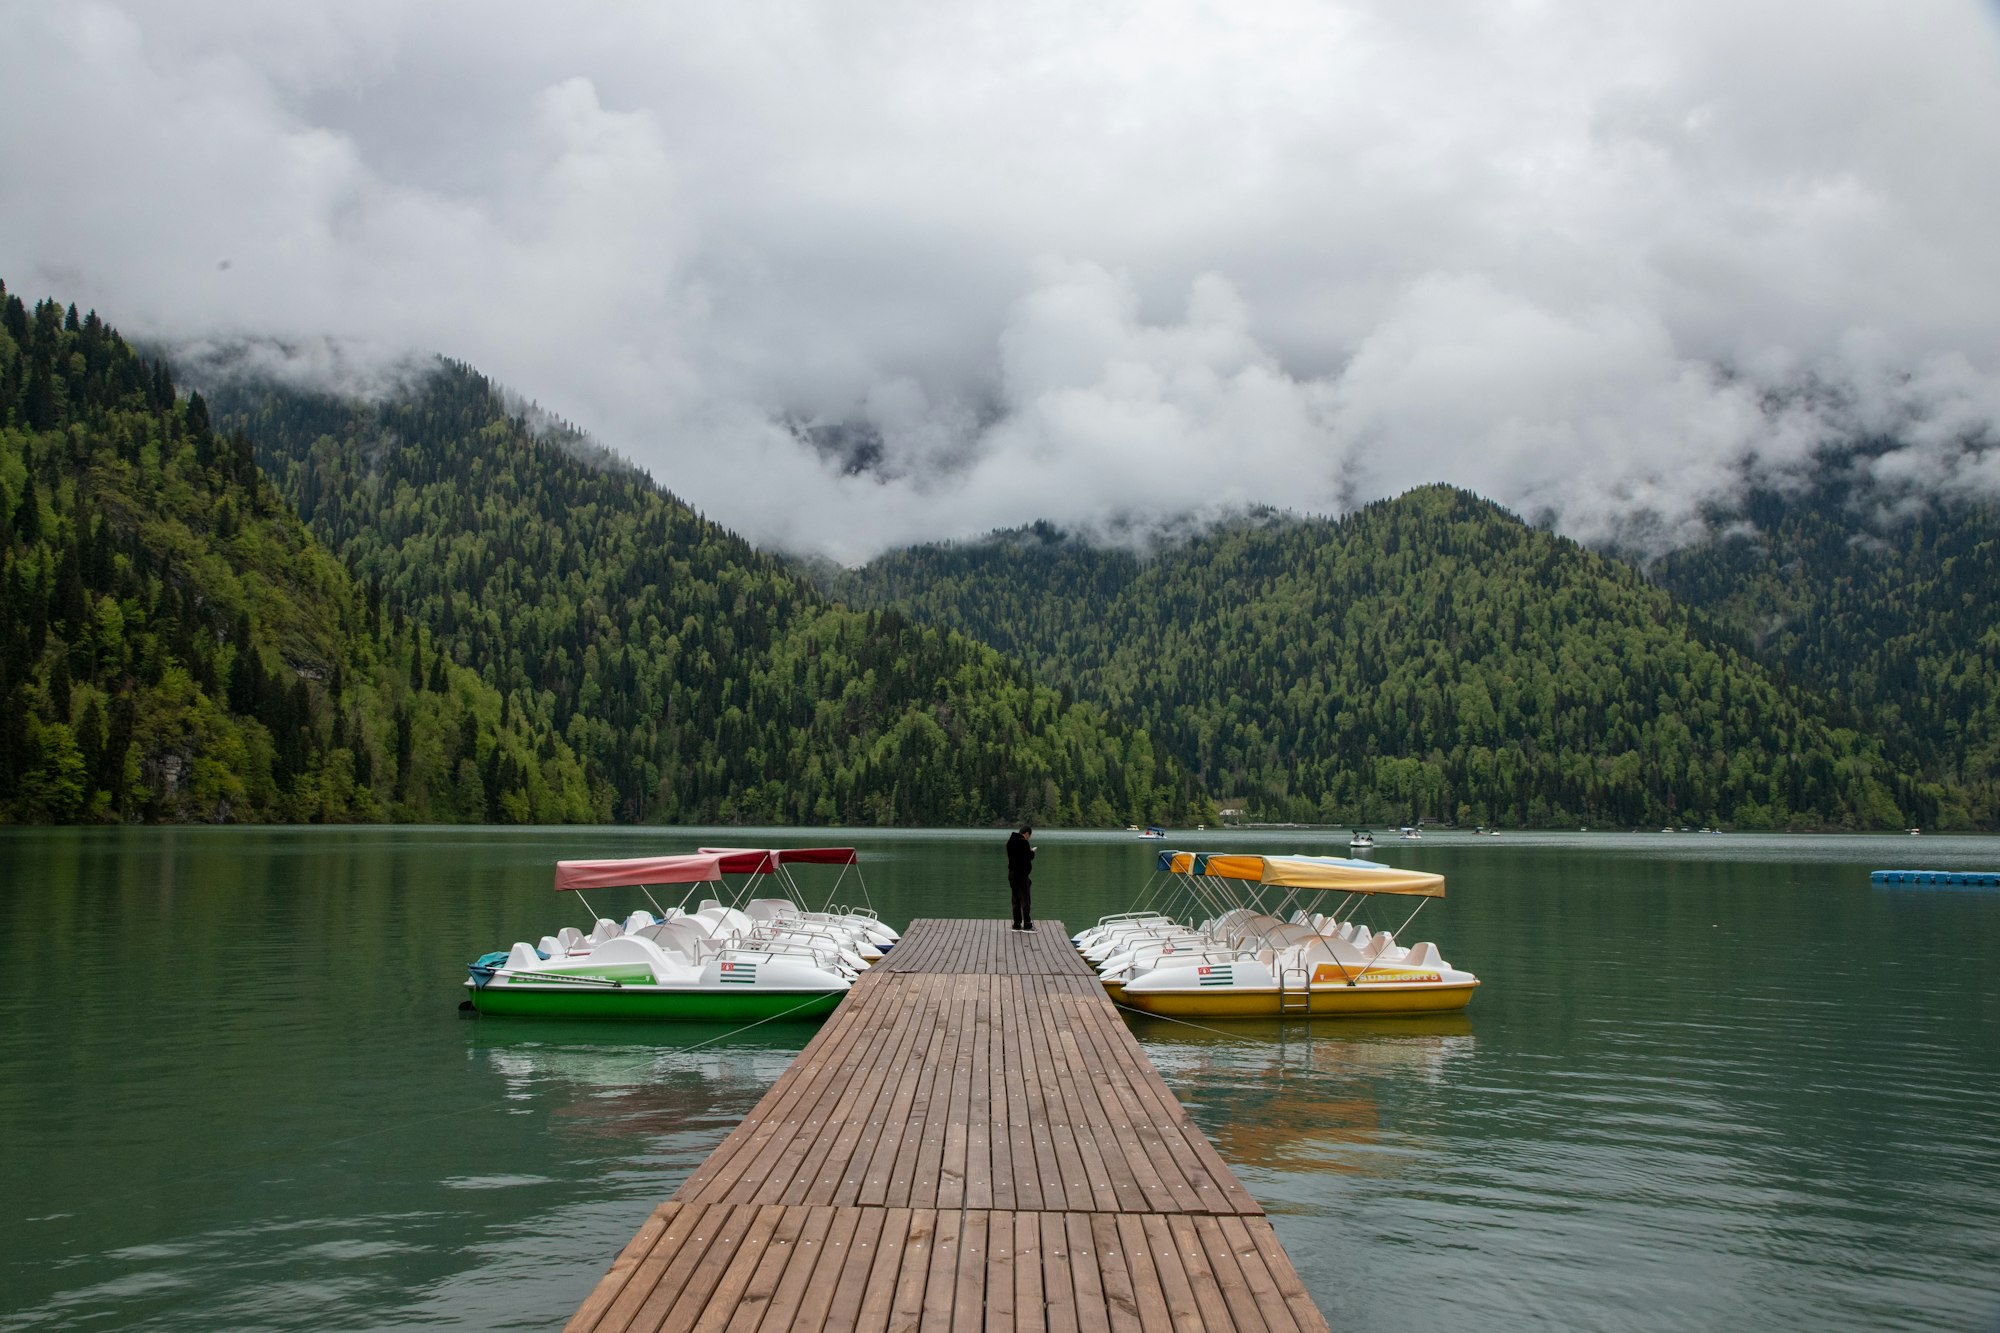 a dock on a lake with several boats in the water